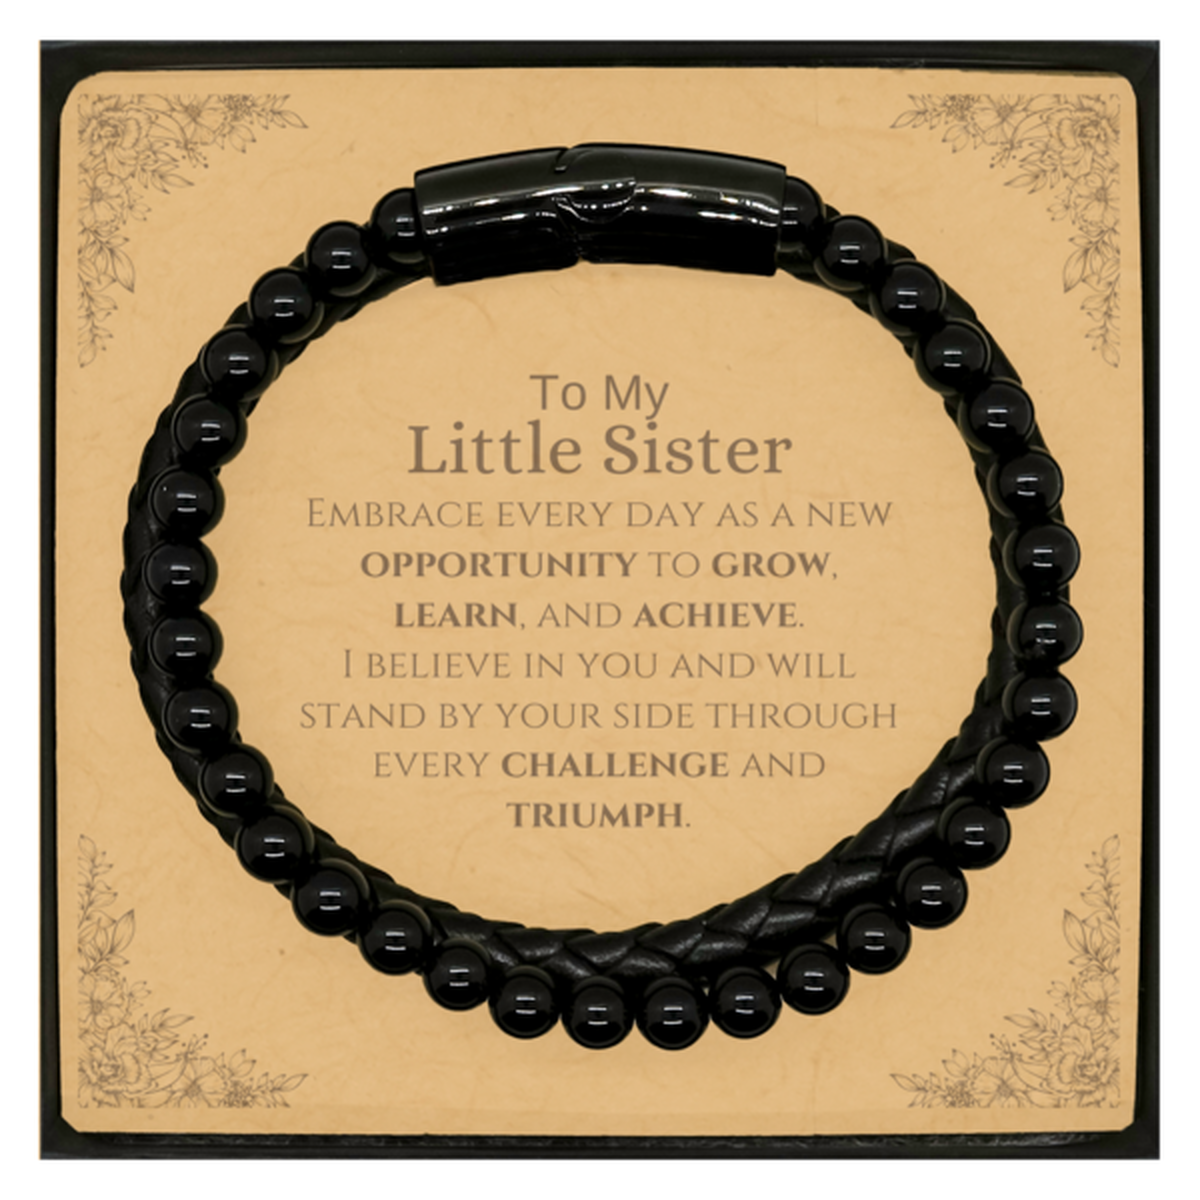 To My Little Sister Gifts, I believe in you and will stand by your side, Inspirational Stone Leather Bracelets For Little Sister, Birthday Christmas Motivational Little Sister Gifts